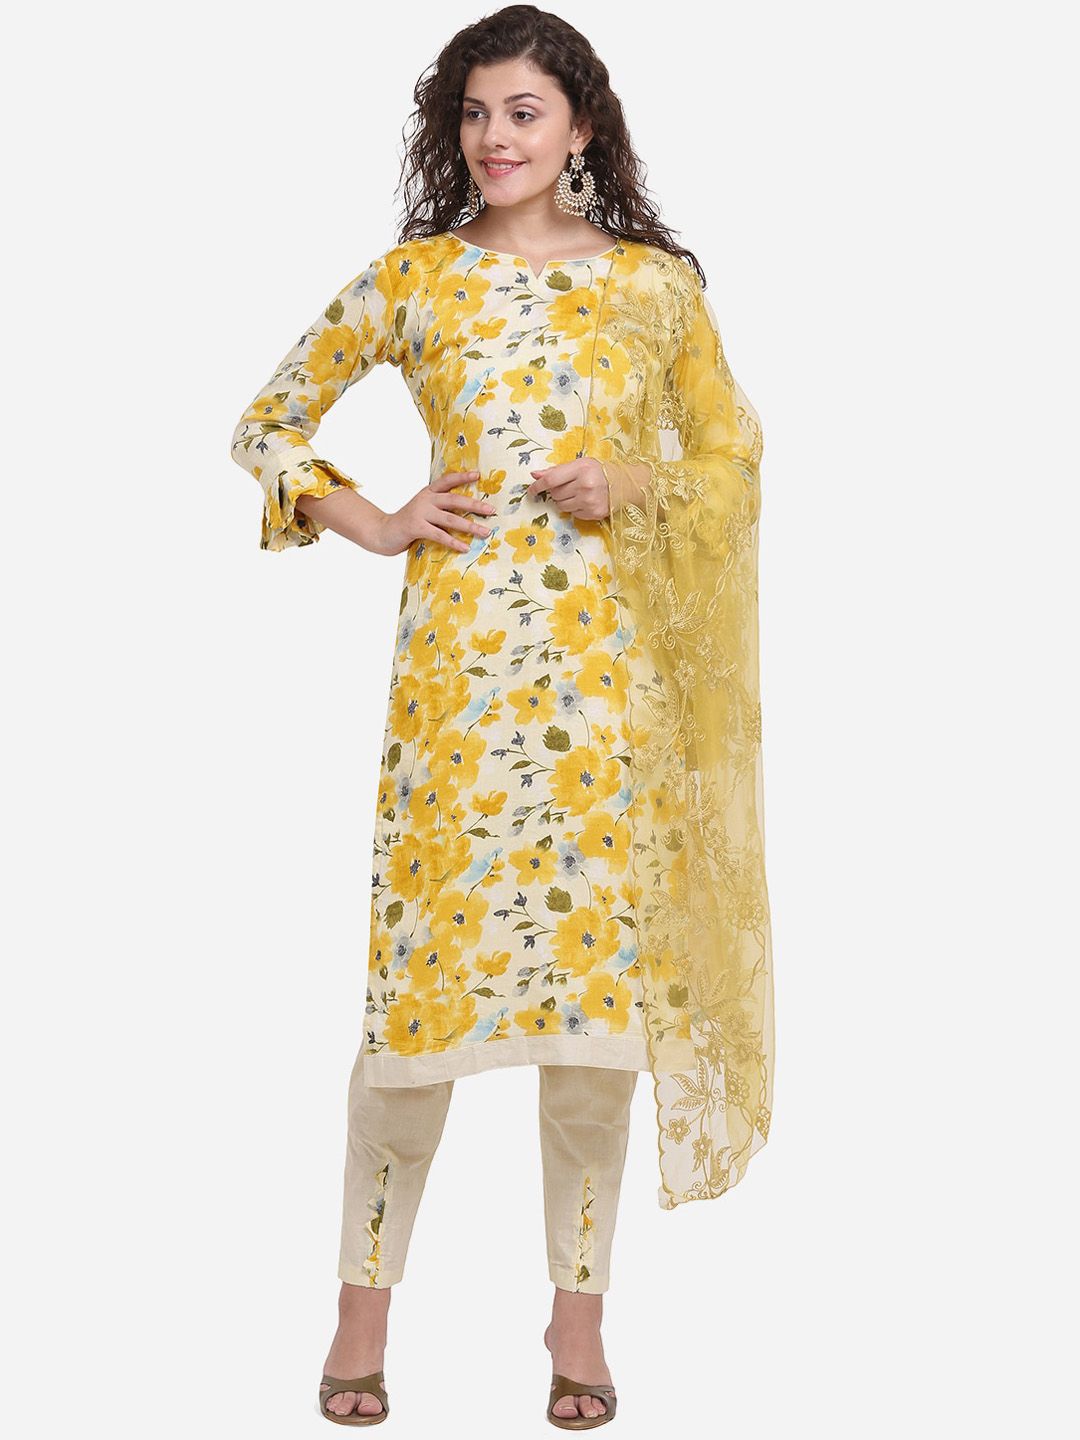 DIVASTRI Yellow & Cream-Coloured Cotton Blend Unstitched Dress Material Price in India